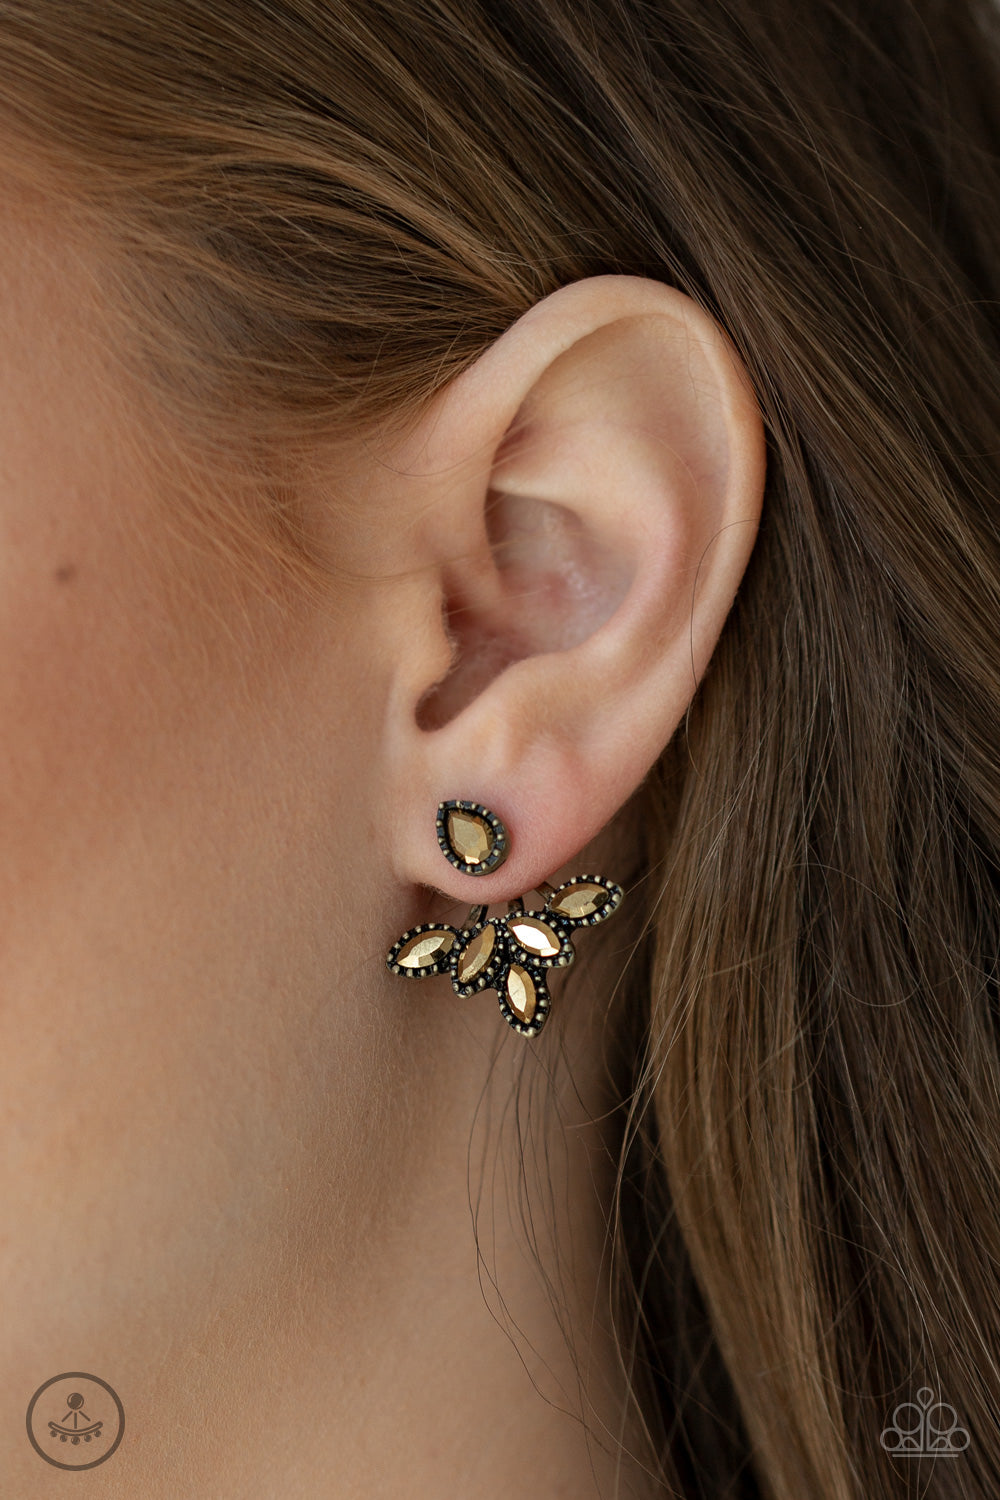 &lt;p&gt;A solitaire teardrop aurum rhinestone attaches to a double-sided post, designed to fasten behind the ear. Encrusted in matching aurum rhinestones, a double-sided post peeks out beneath the ear, creating a glittery fringe. Earring attaches to a standard post fitting.

 &lt;/p&gt;

&lt;p&gt; &lt;i&gt;Sold as one pair of double-sided post earrings.&lt;/i&gt;&lt;/p&gt;


